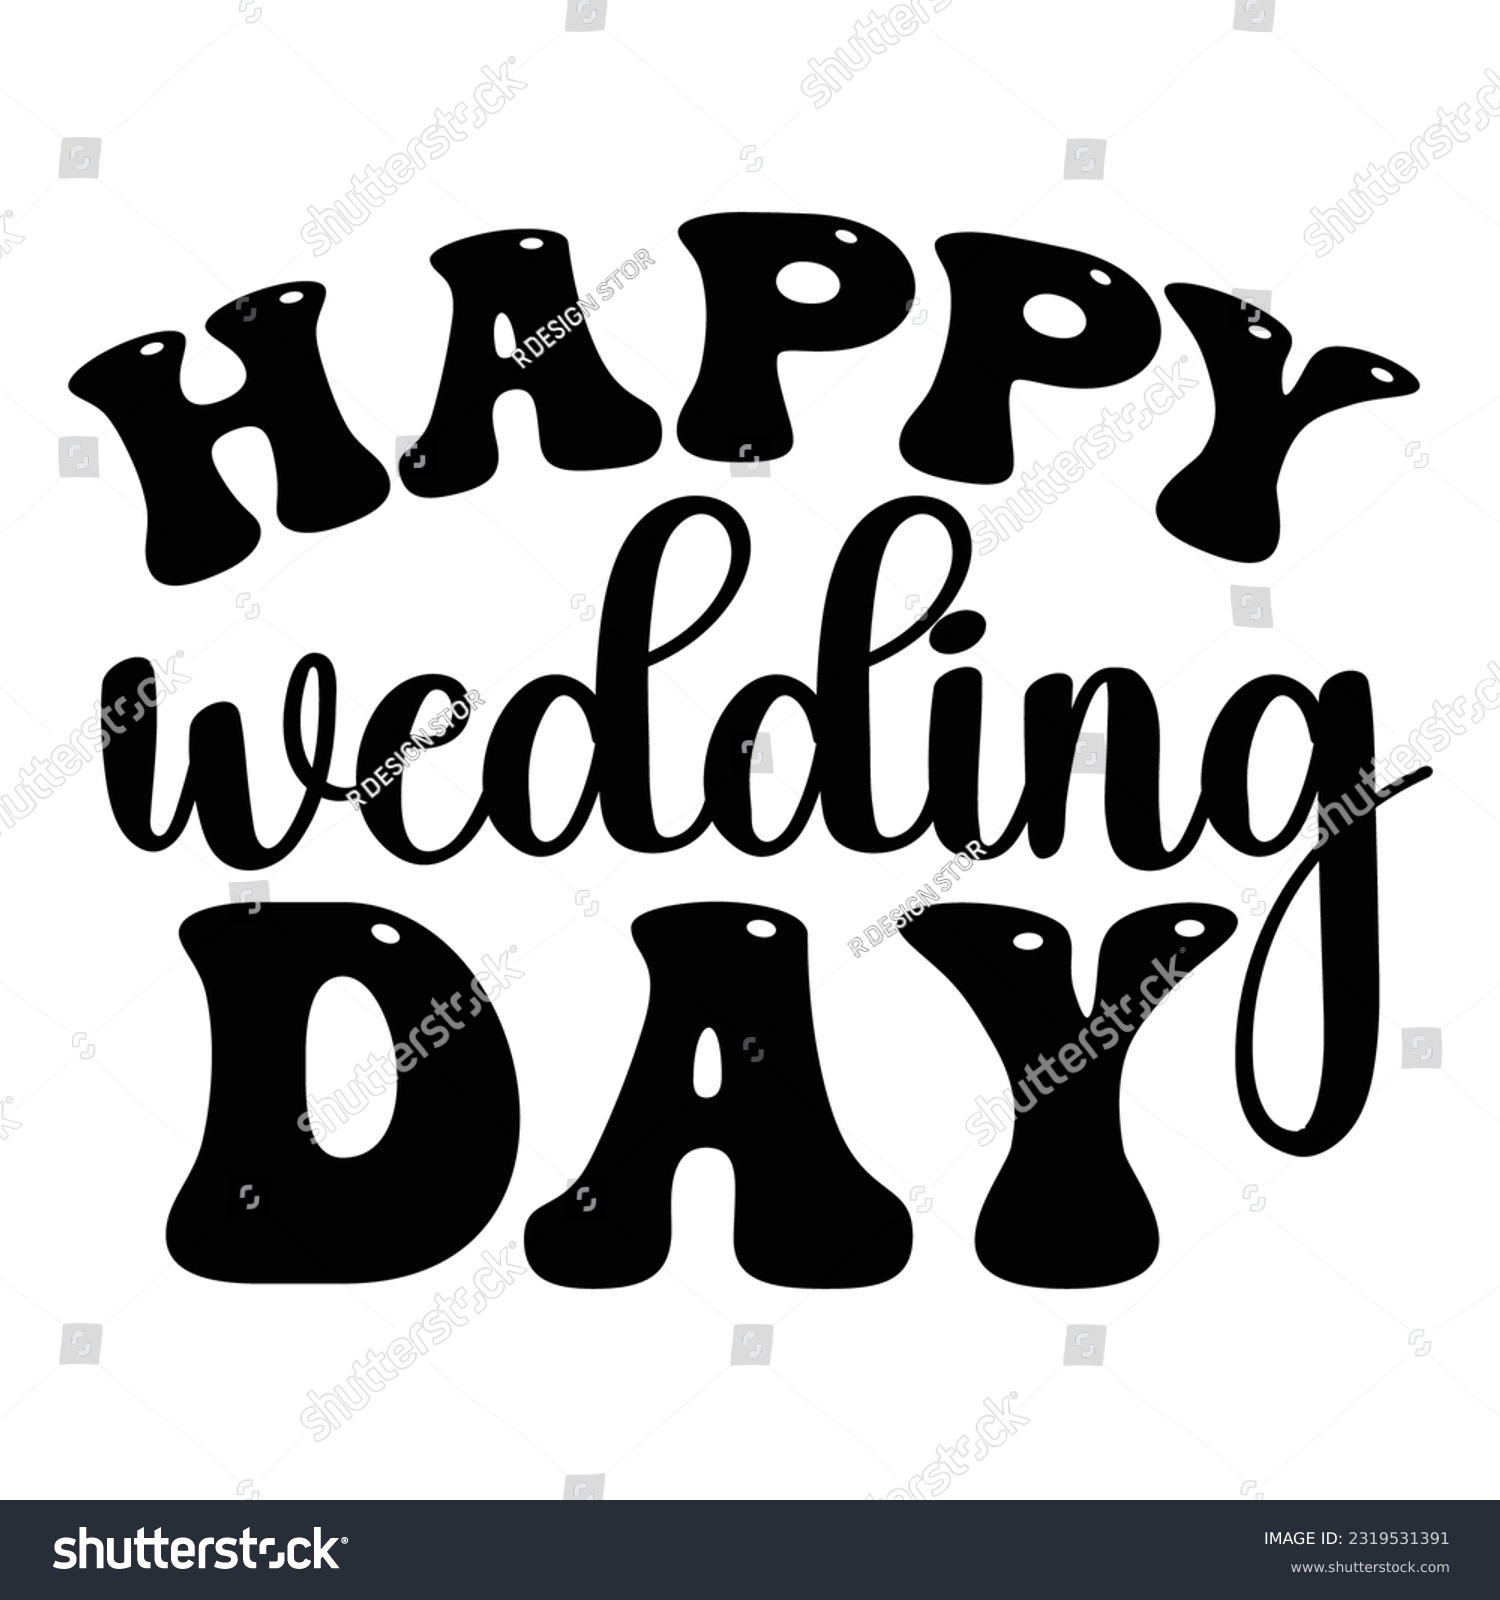 SVG of wedding day svg design for t-shirt, cards, frame artwork, bags, mugs, stickers, tumblers, phone cases, print etc.
 svg